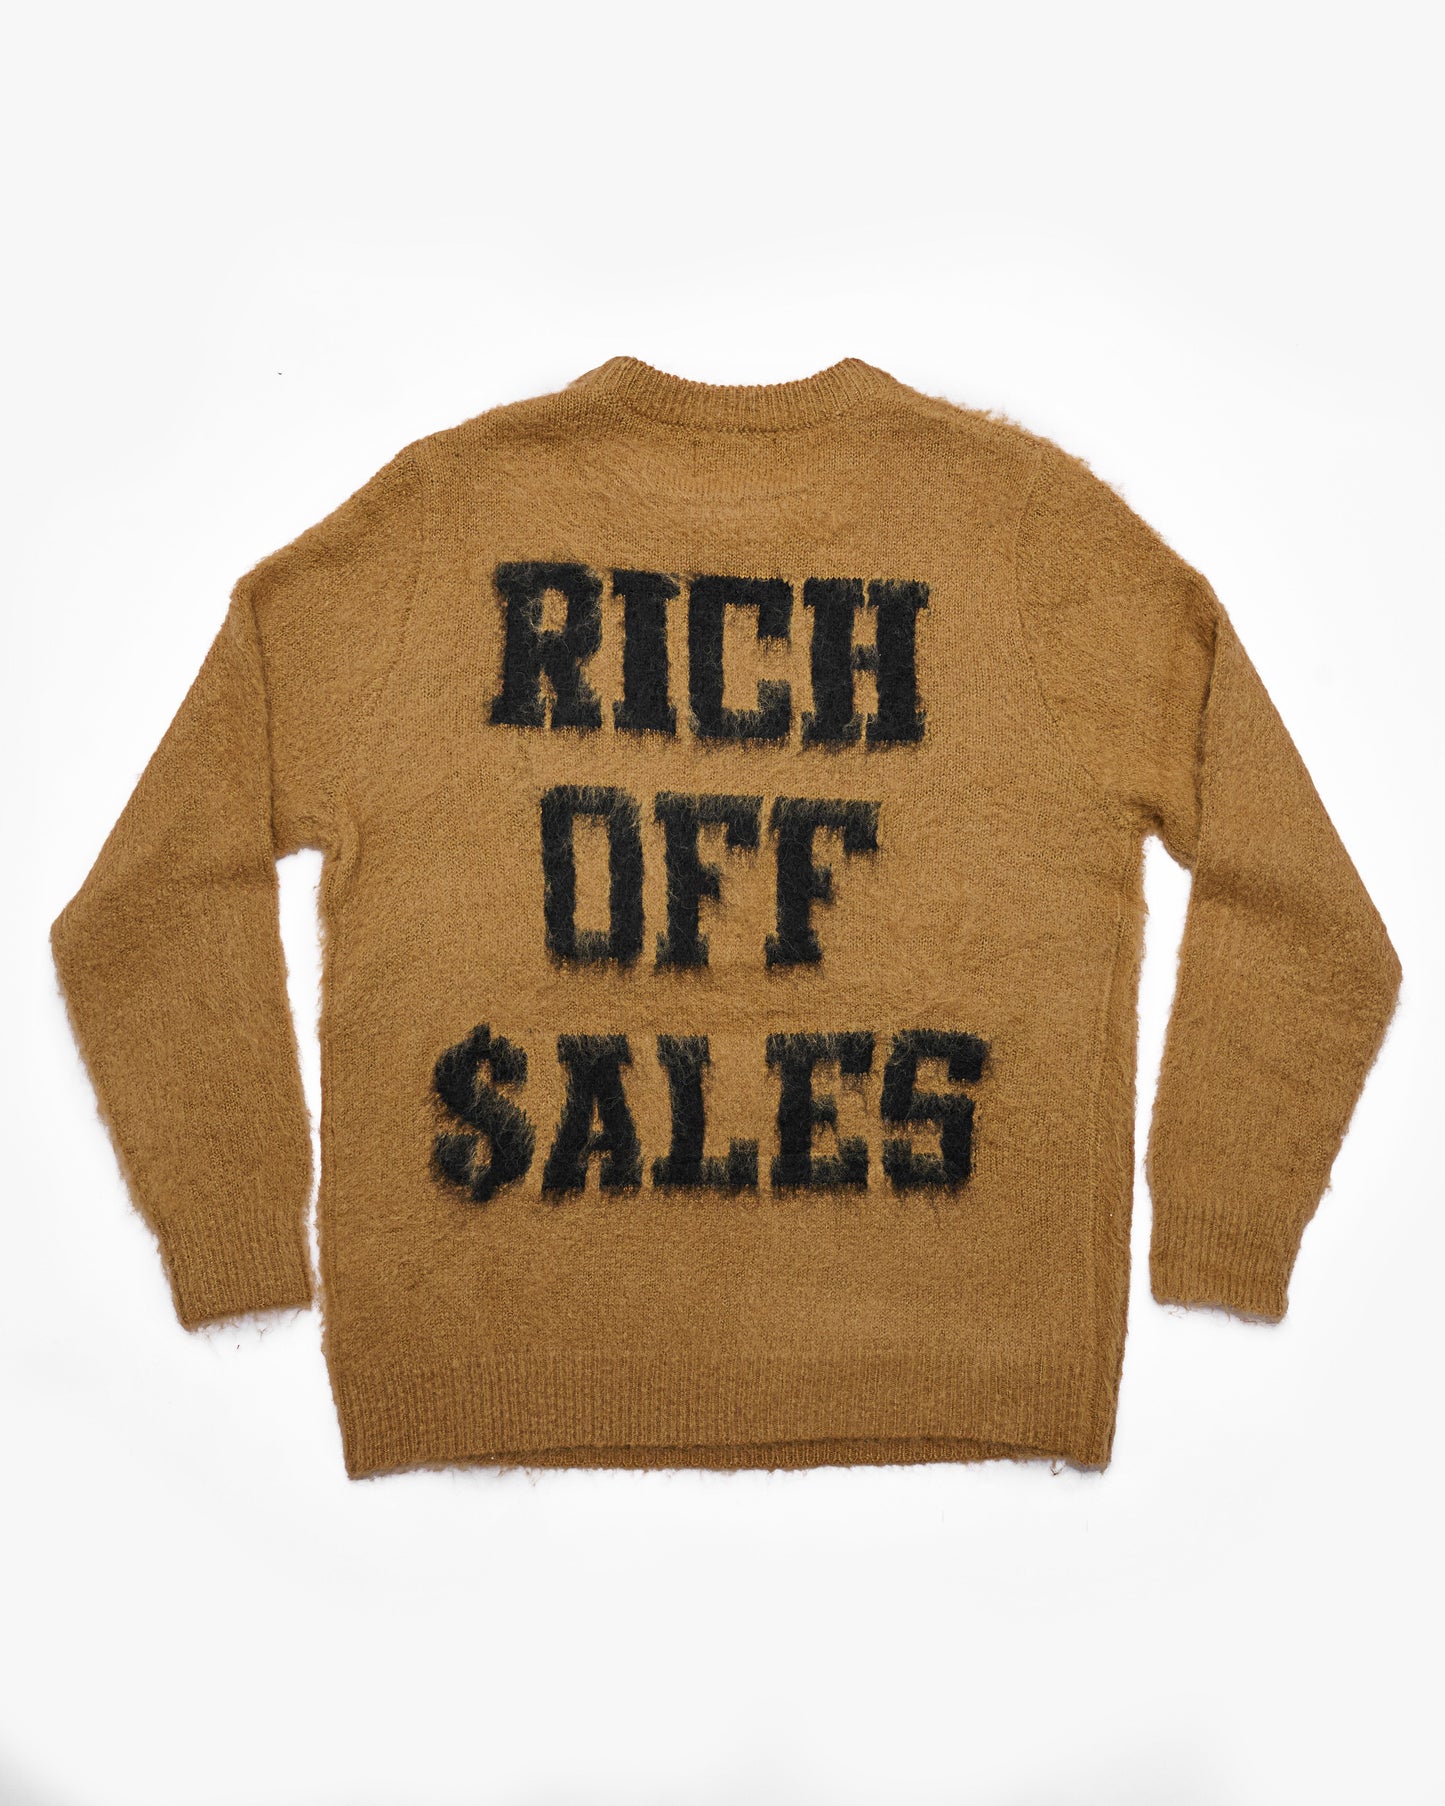 Rich Off Sales Mohair Sweater (Tan)